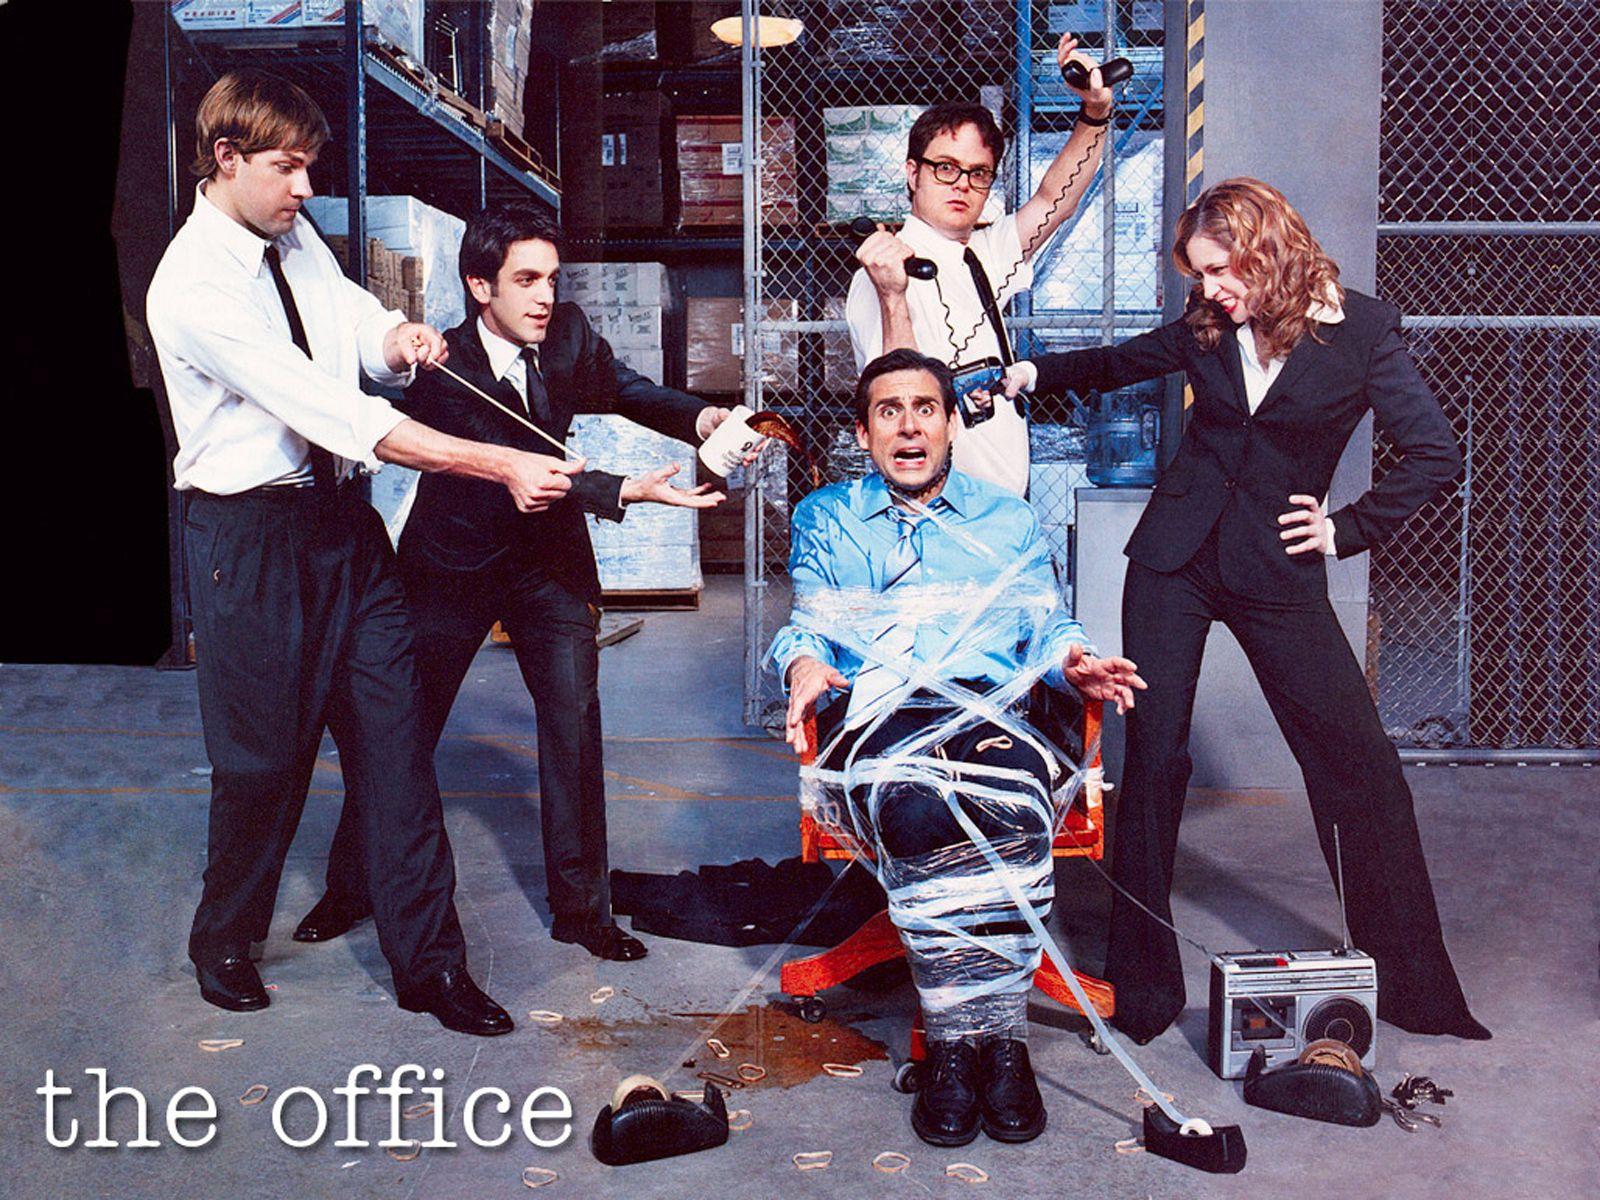 The Office (US) Wallpaper and Background Imagex1200